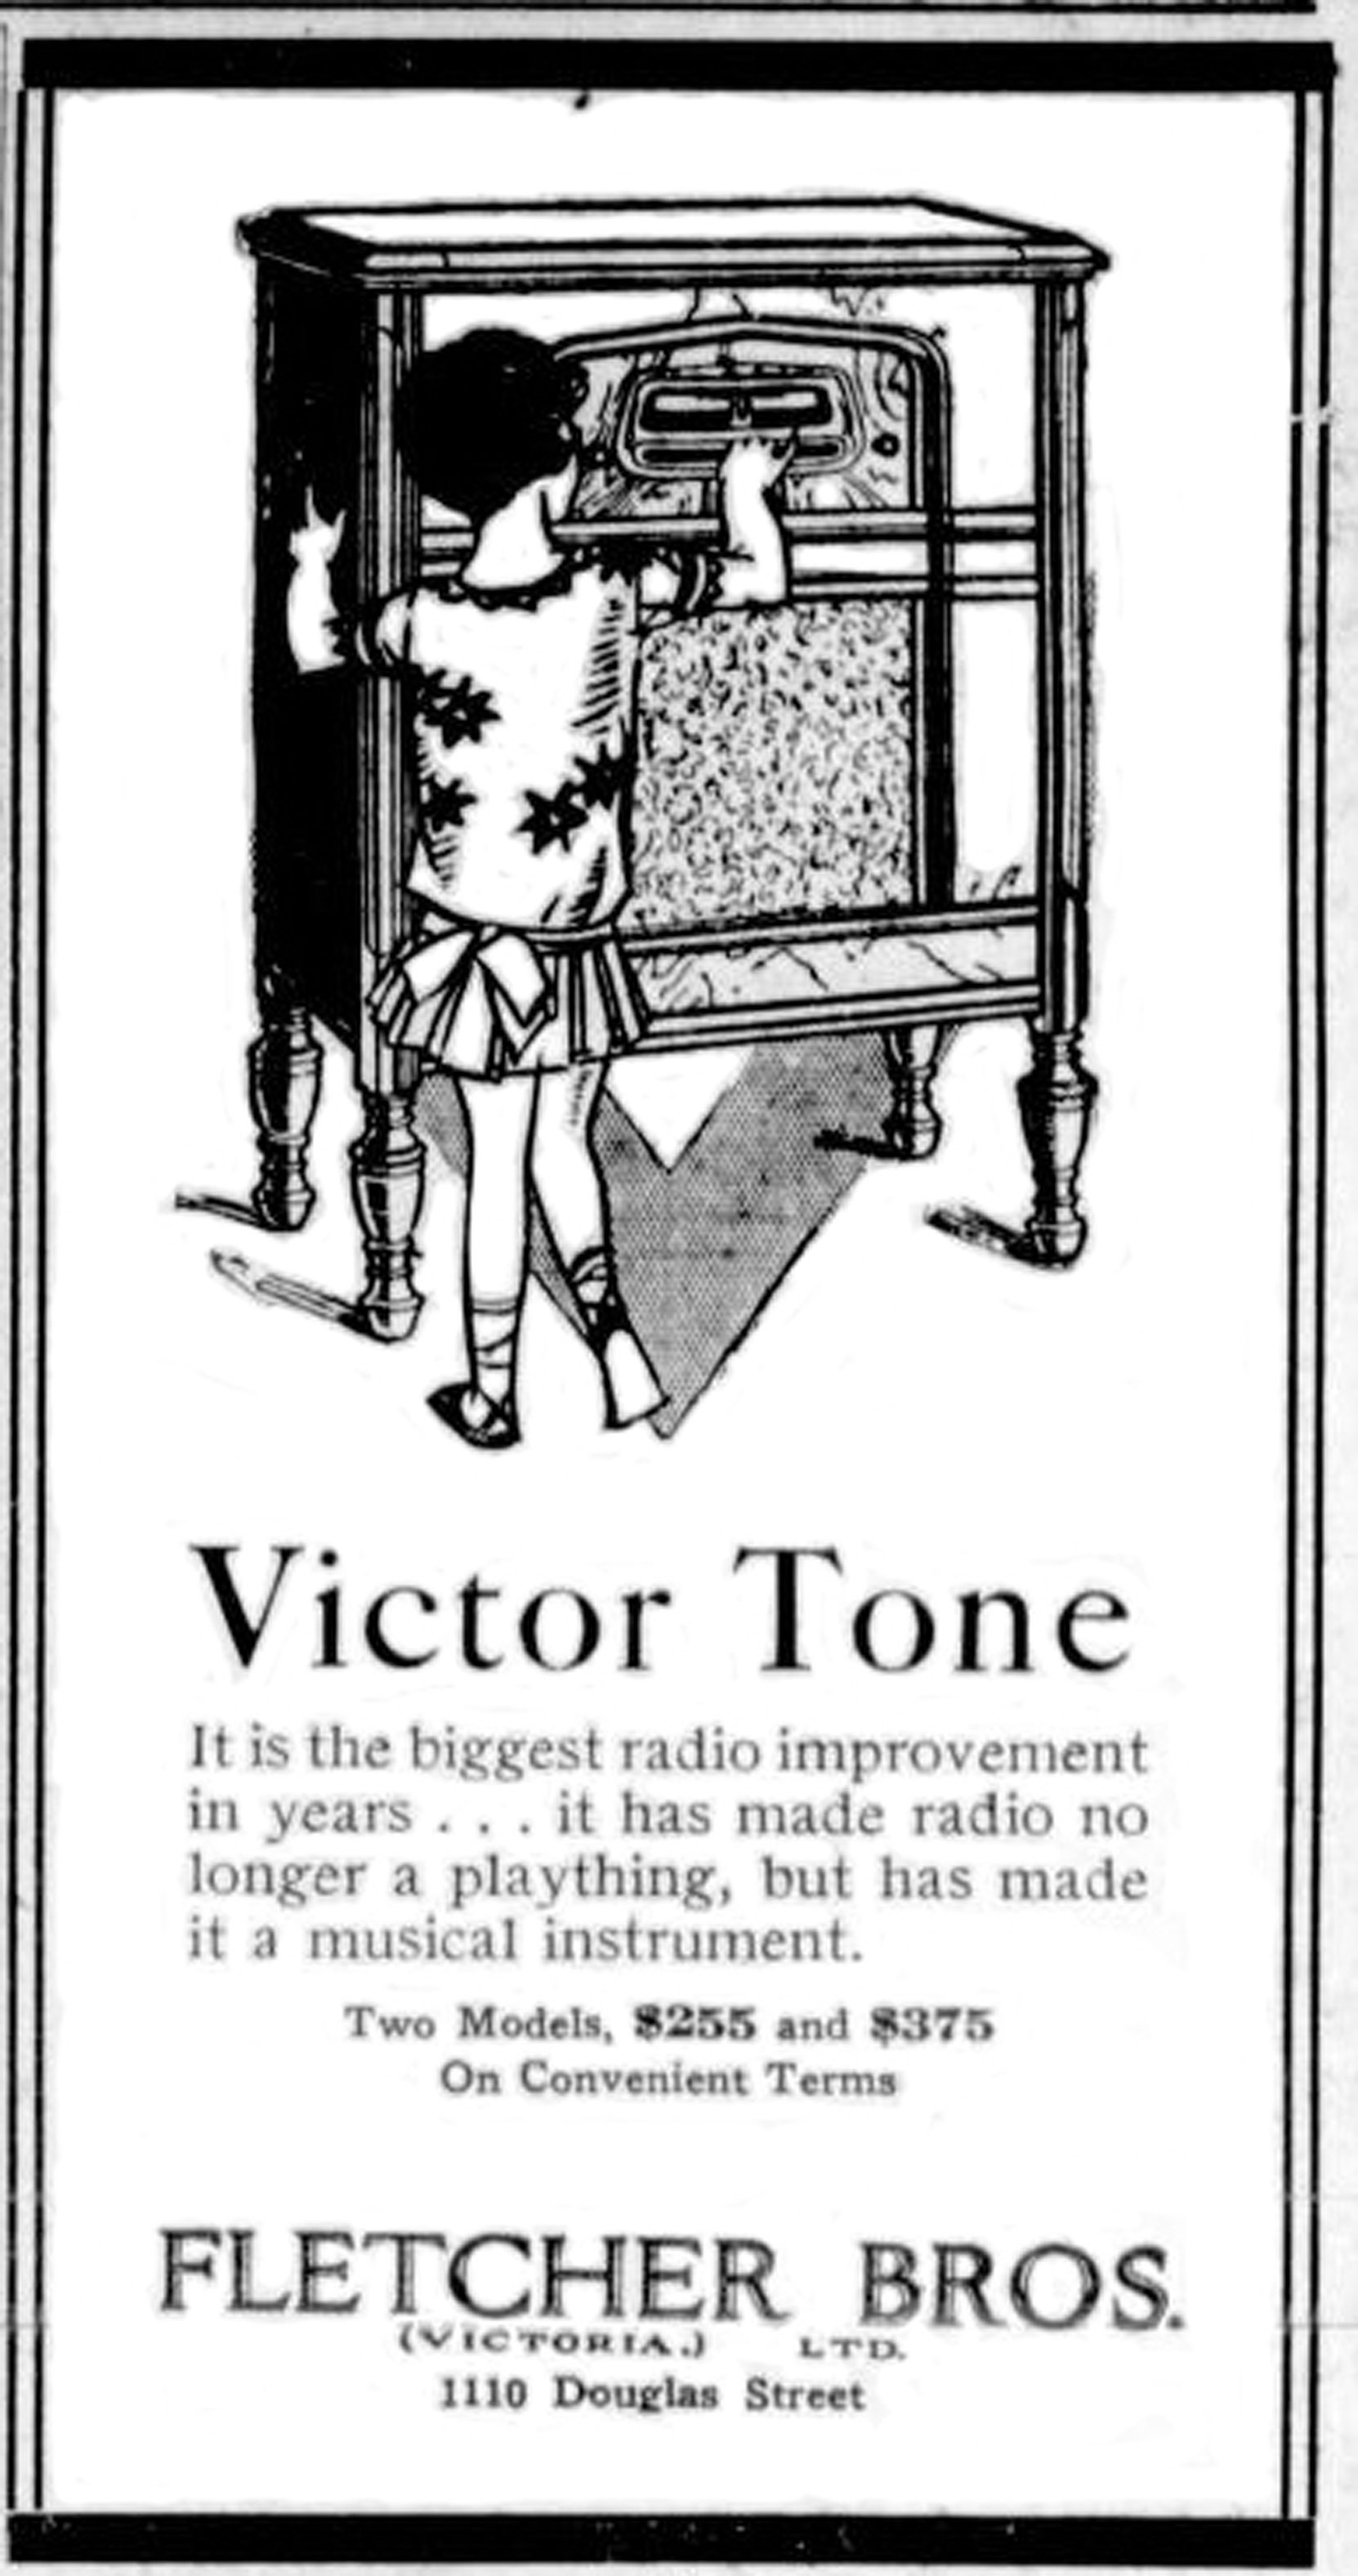 1930 advertisement for Victor Tone radios, sold at Fletcher Brothers, 1110 Douglas Street. (Victoria Online Sightseeing Tours collection)